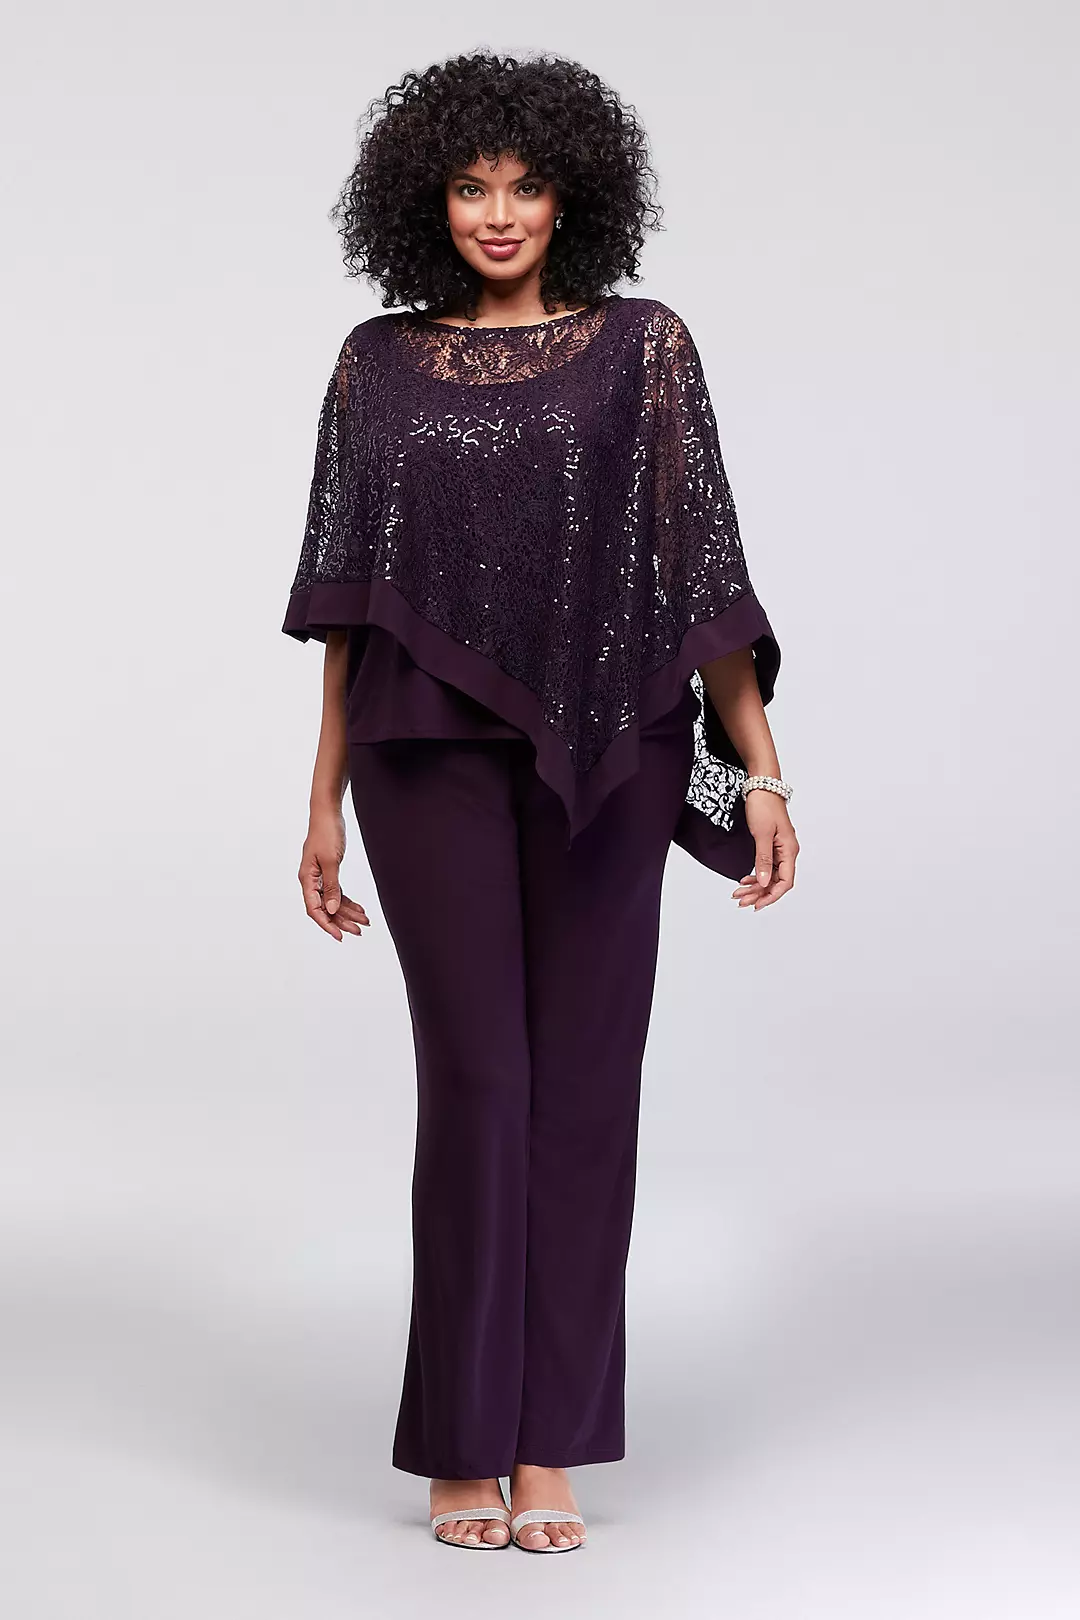 Lace and Sequin Pantsuit with Sheer Capelet Image